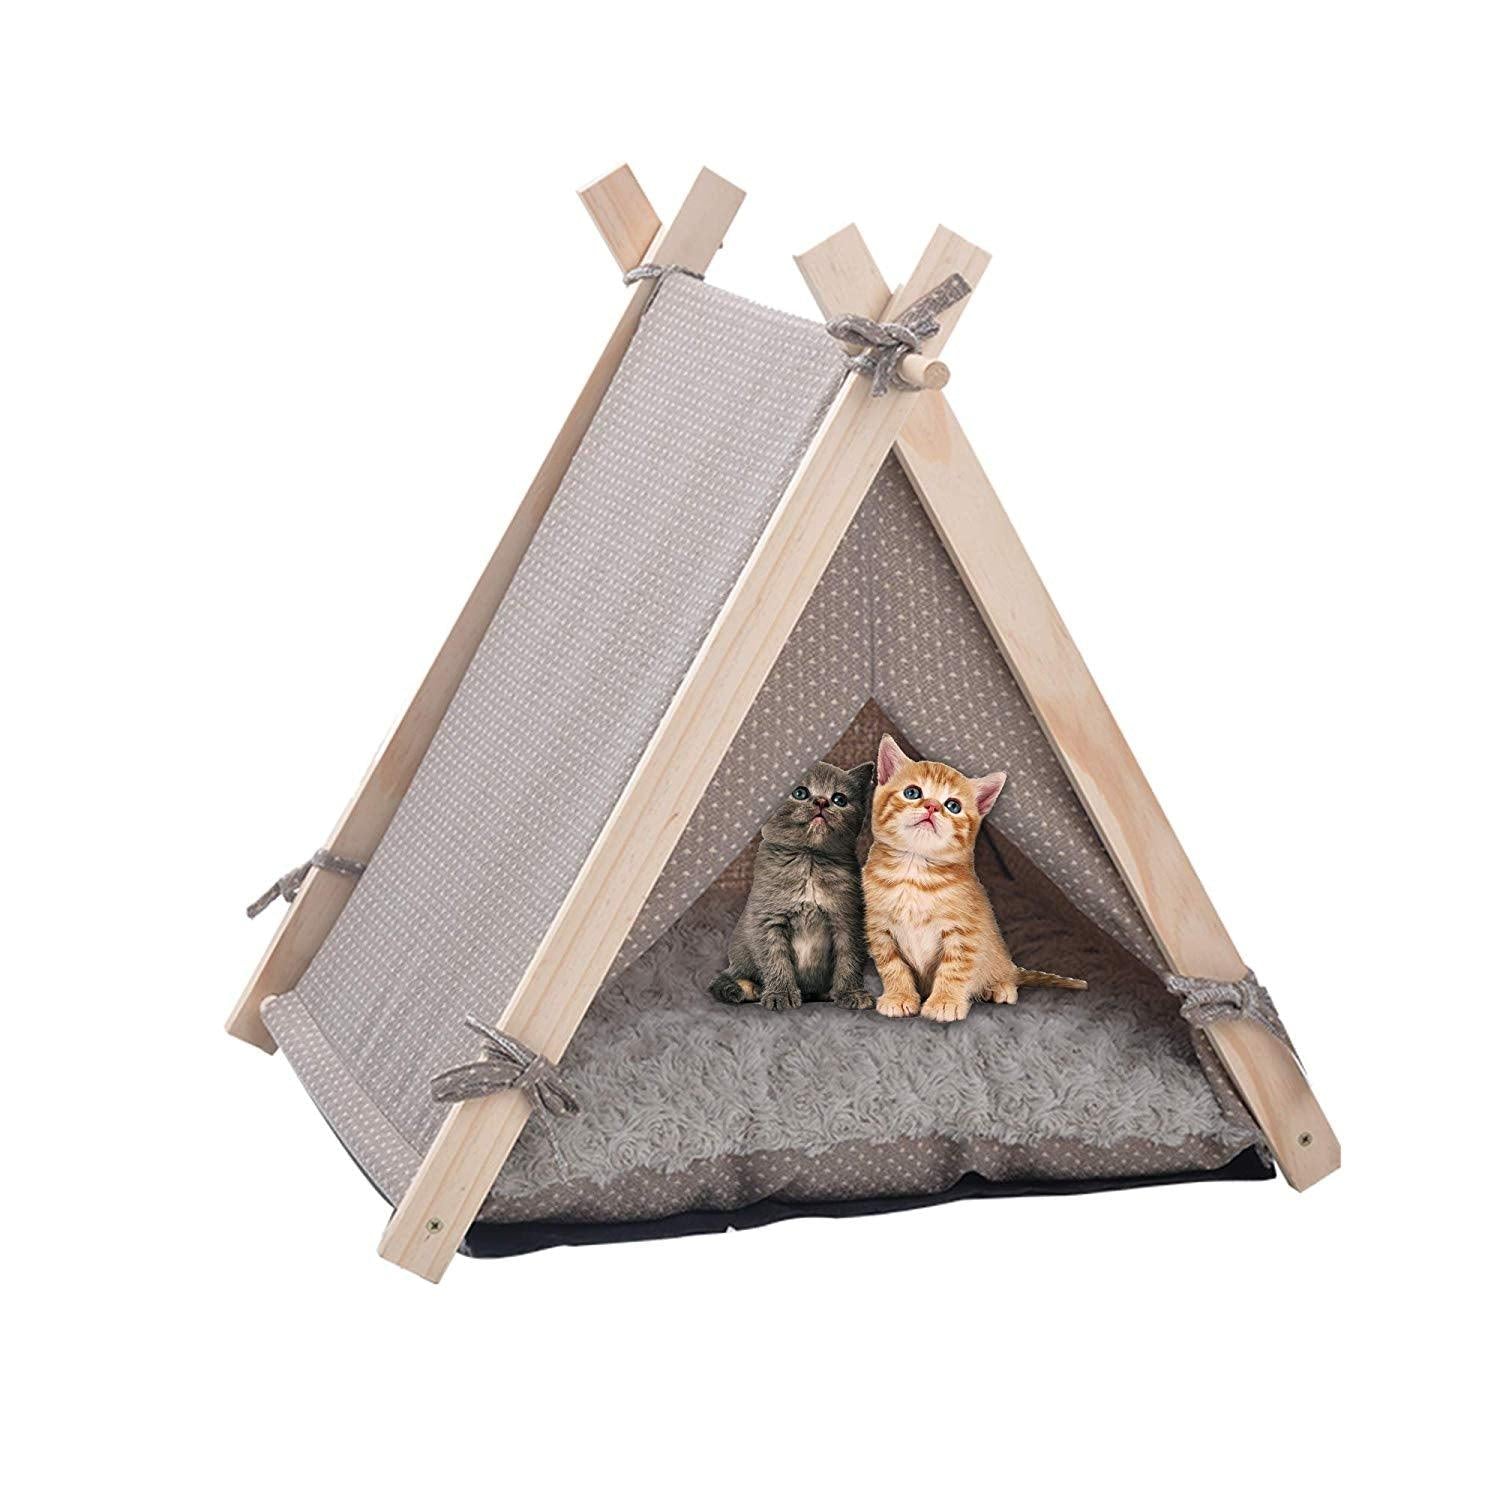 Bosonshop Pet Teepee Tent Dog & Cat Tent Bed Small Washable with Soft Bed Padding for Kitty Puppy Small Dog